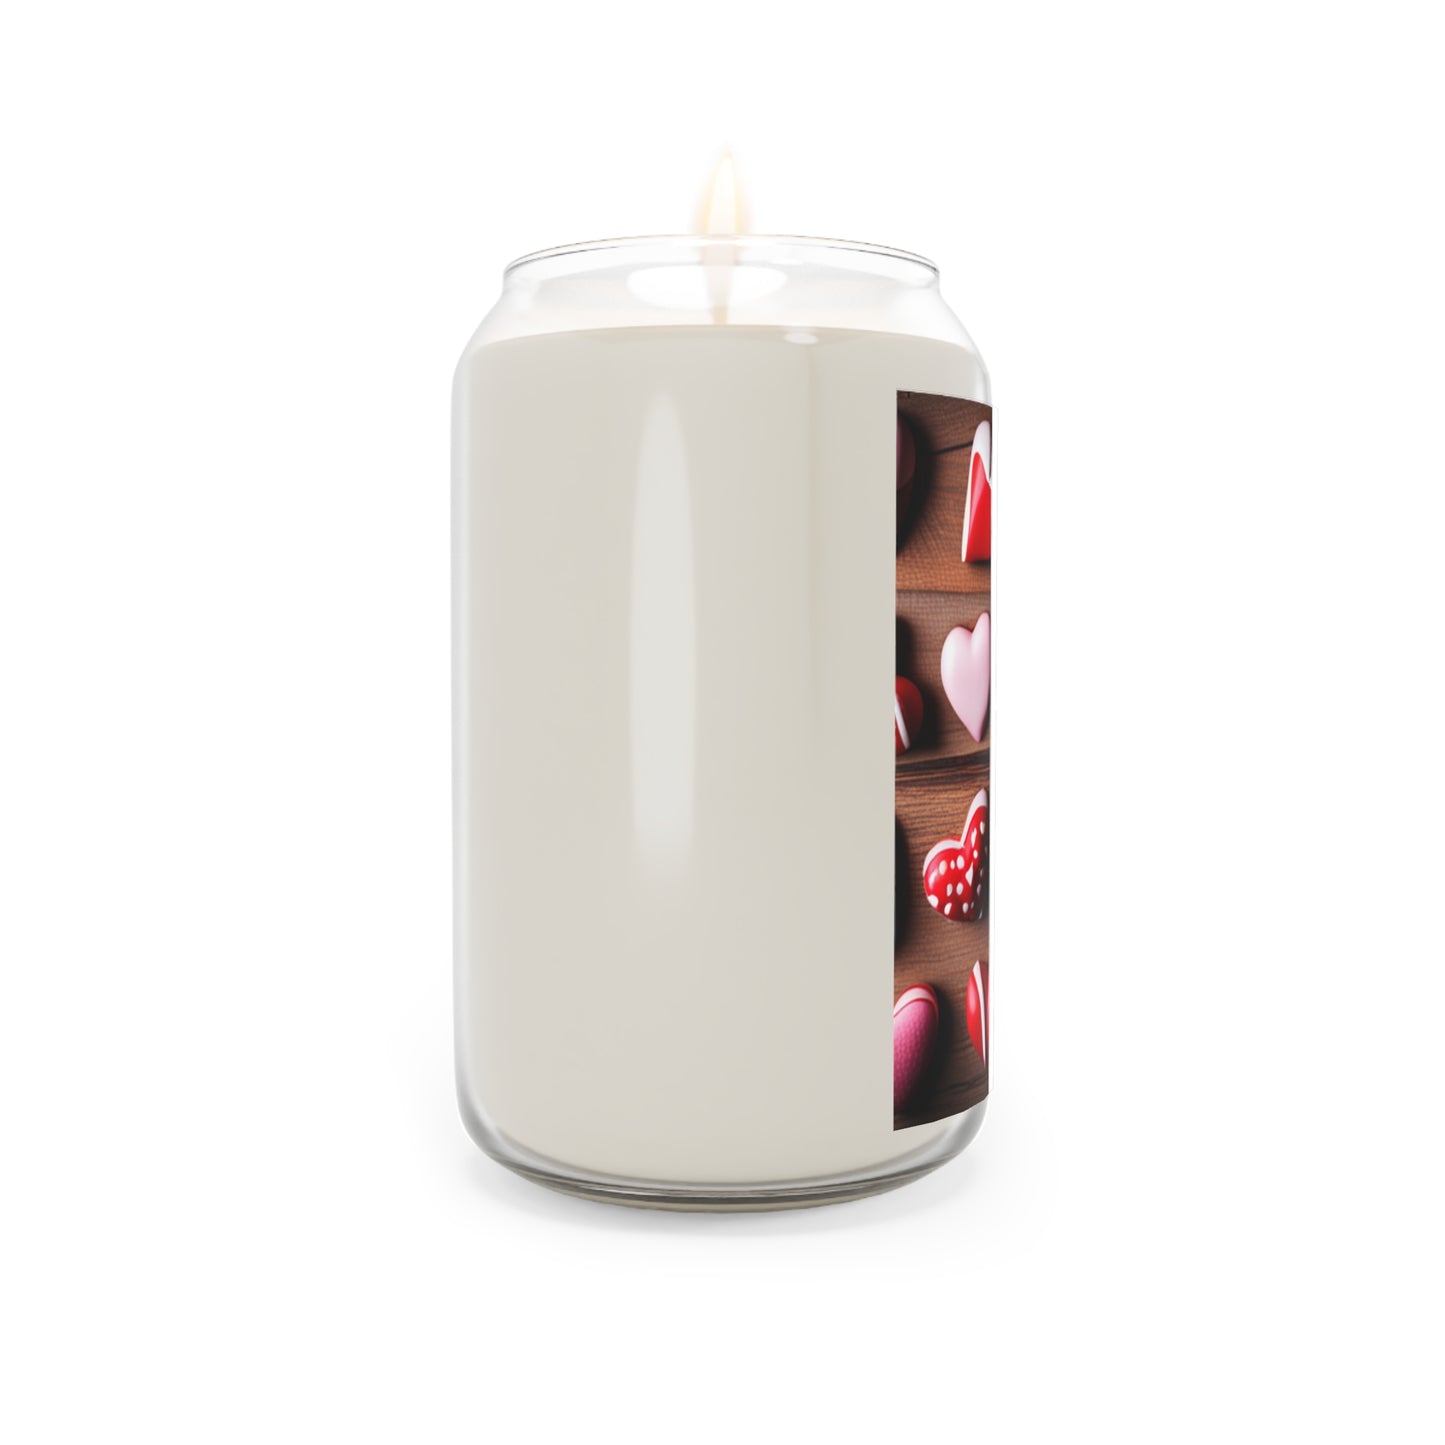 Candy Hearts Scented Candle, Large Size 13.75oz, 3 Scents To Choose From, 100% Cotton Wick